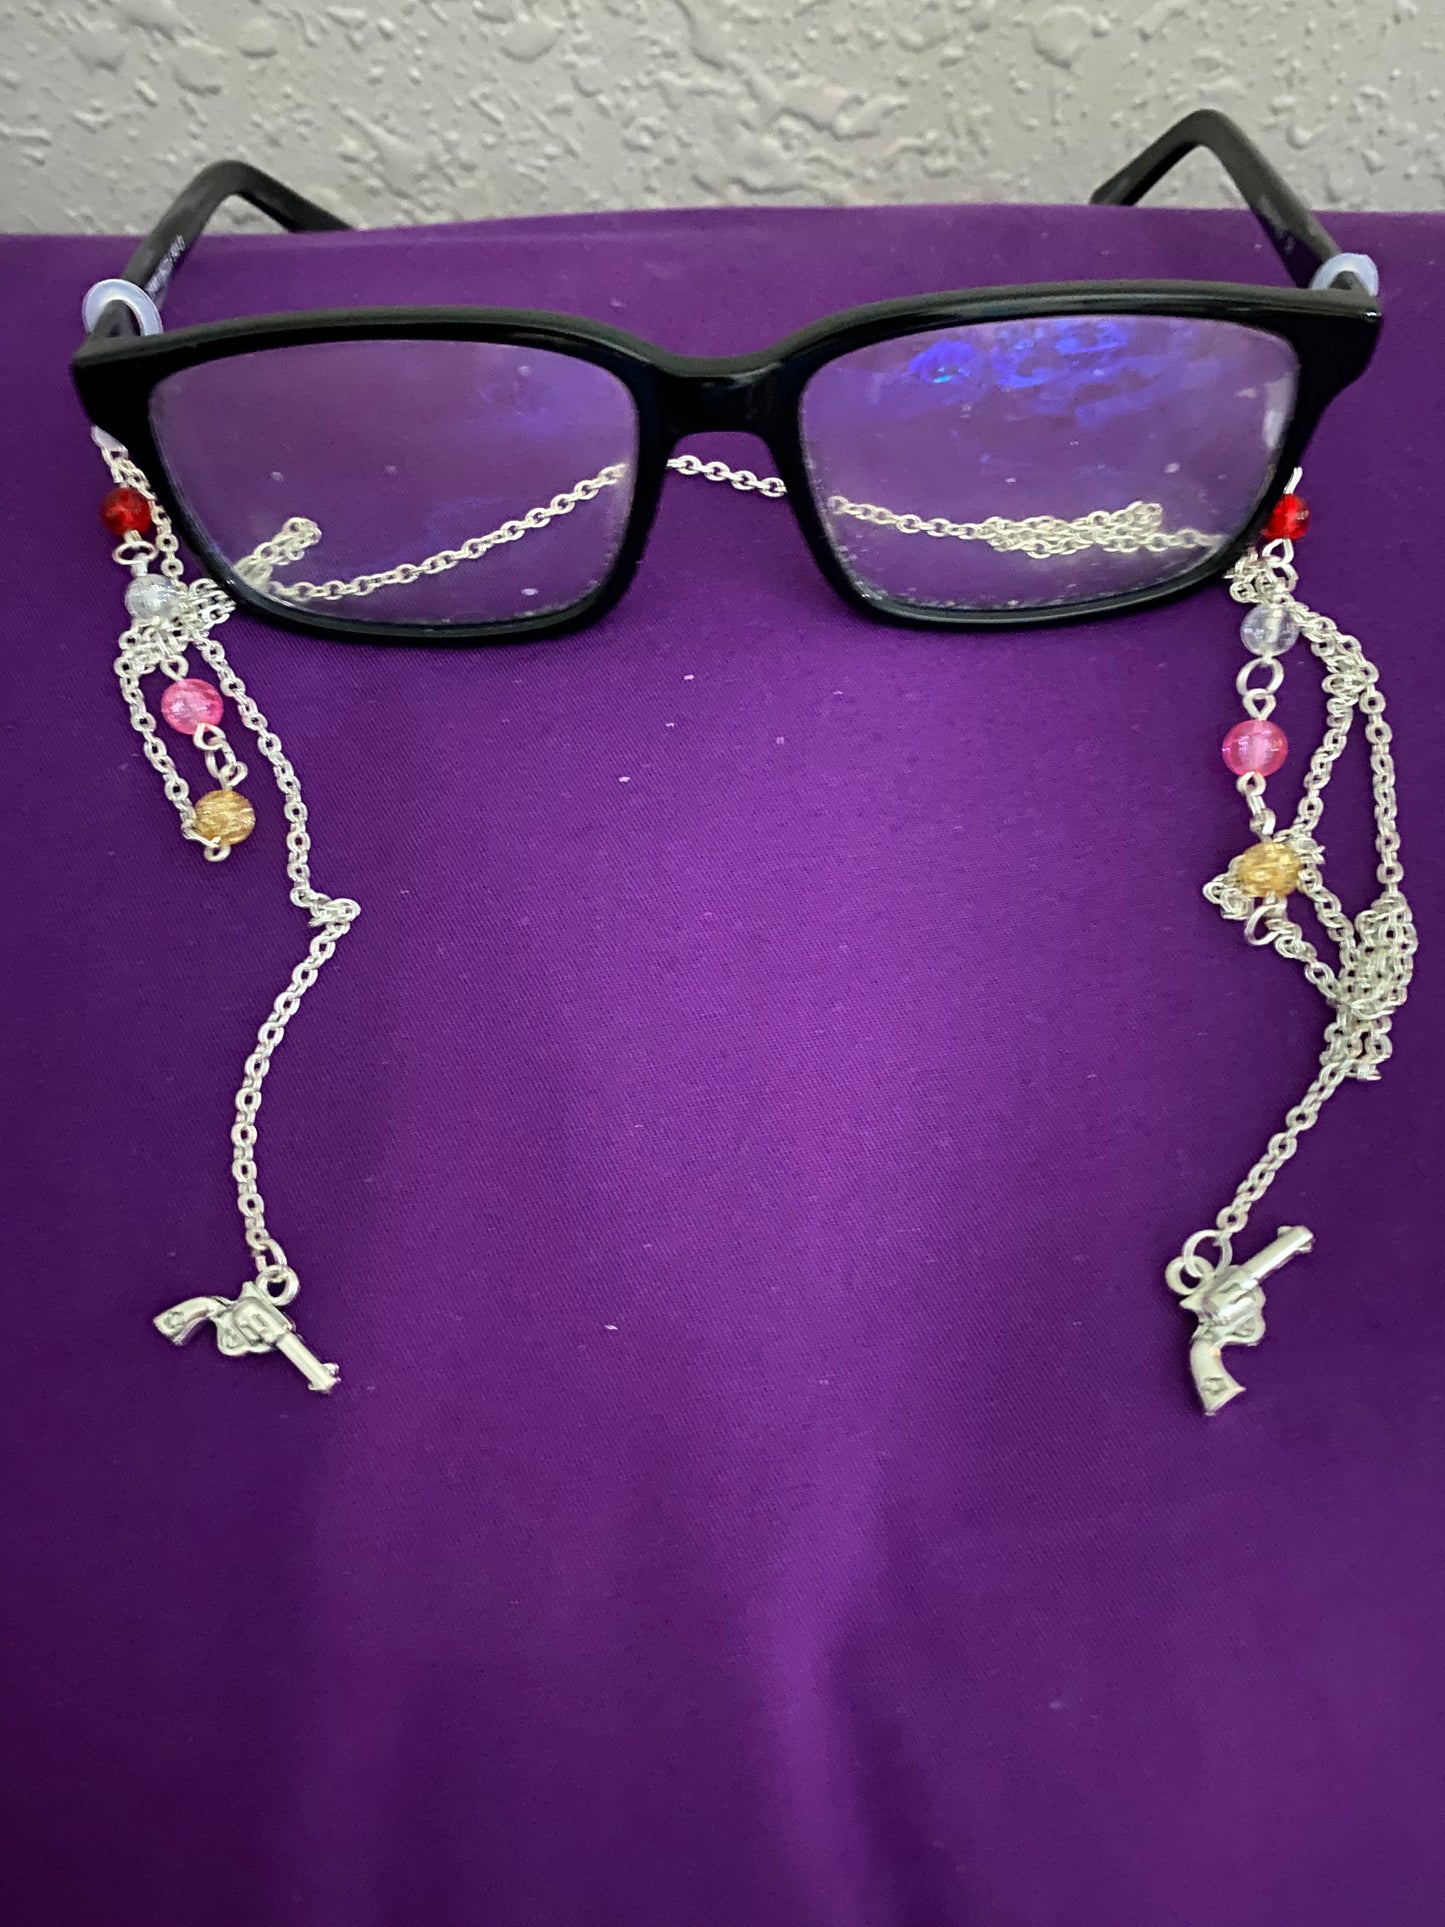 Entity Inspired Glasses Chains: The Slaughter